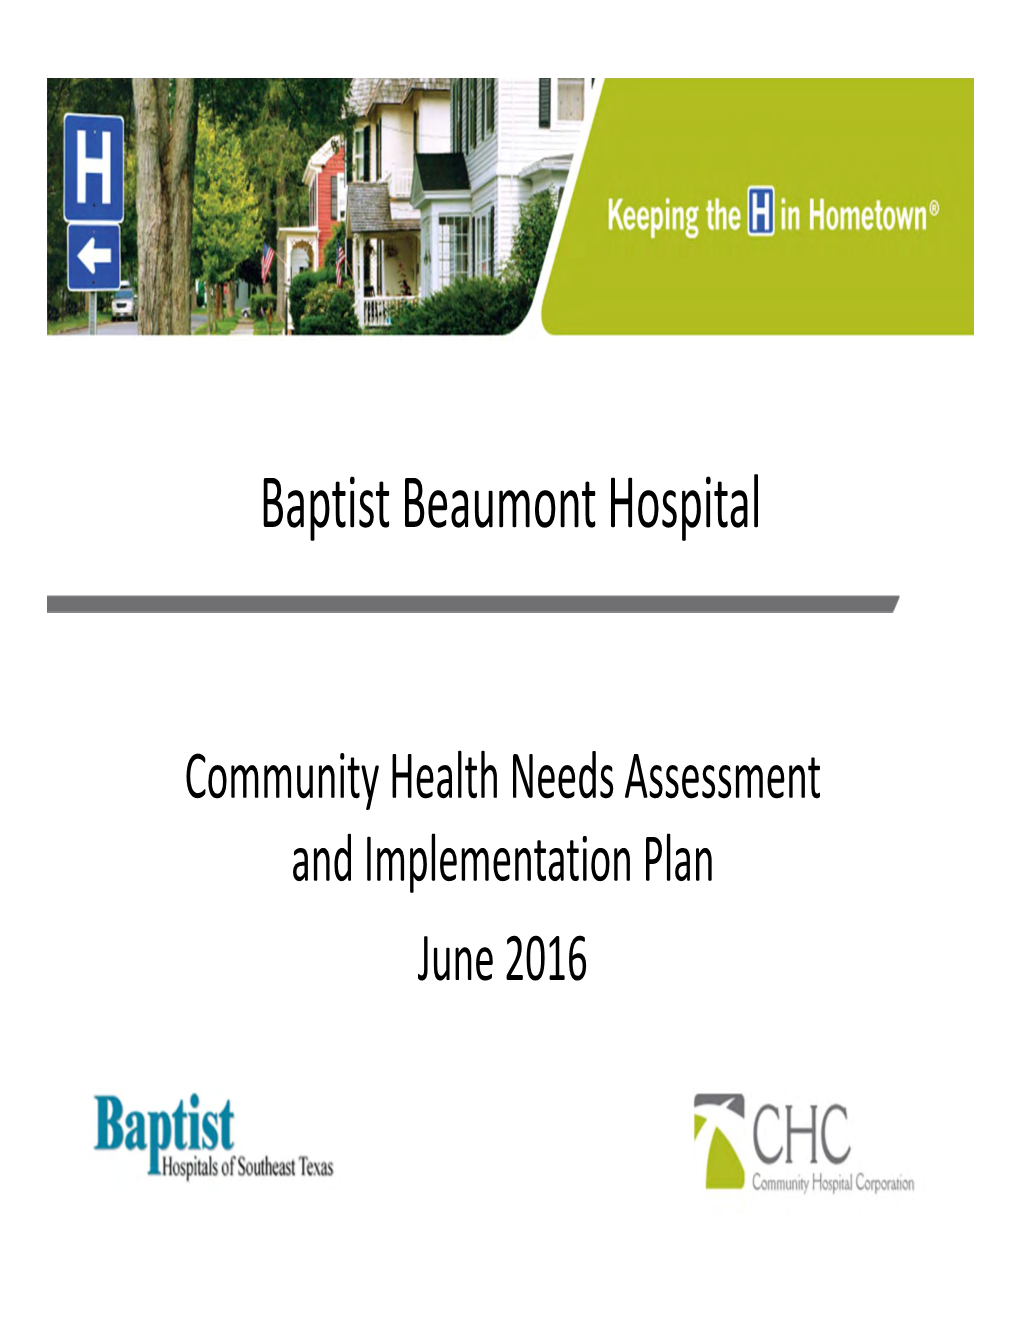 2016 Community Health Needs Assessment and Implementation Plan on June 27, 2016